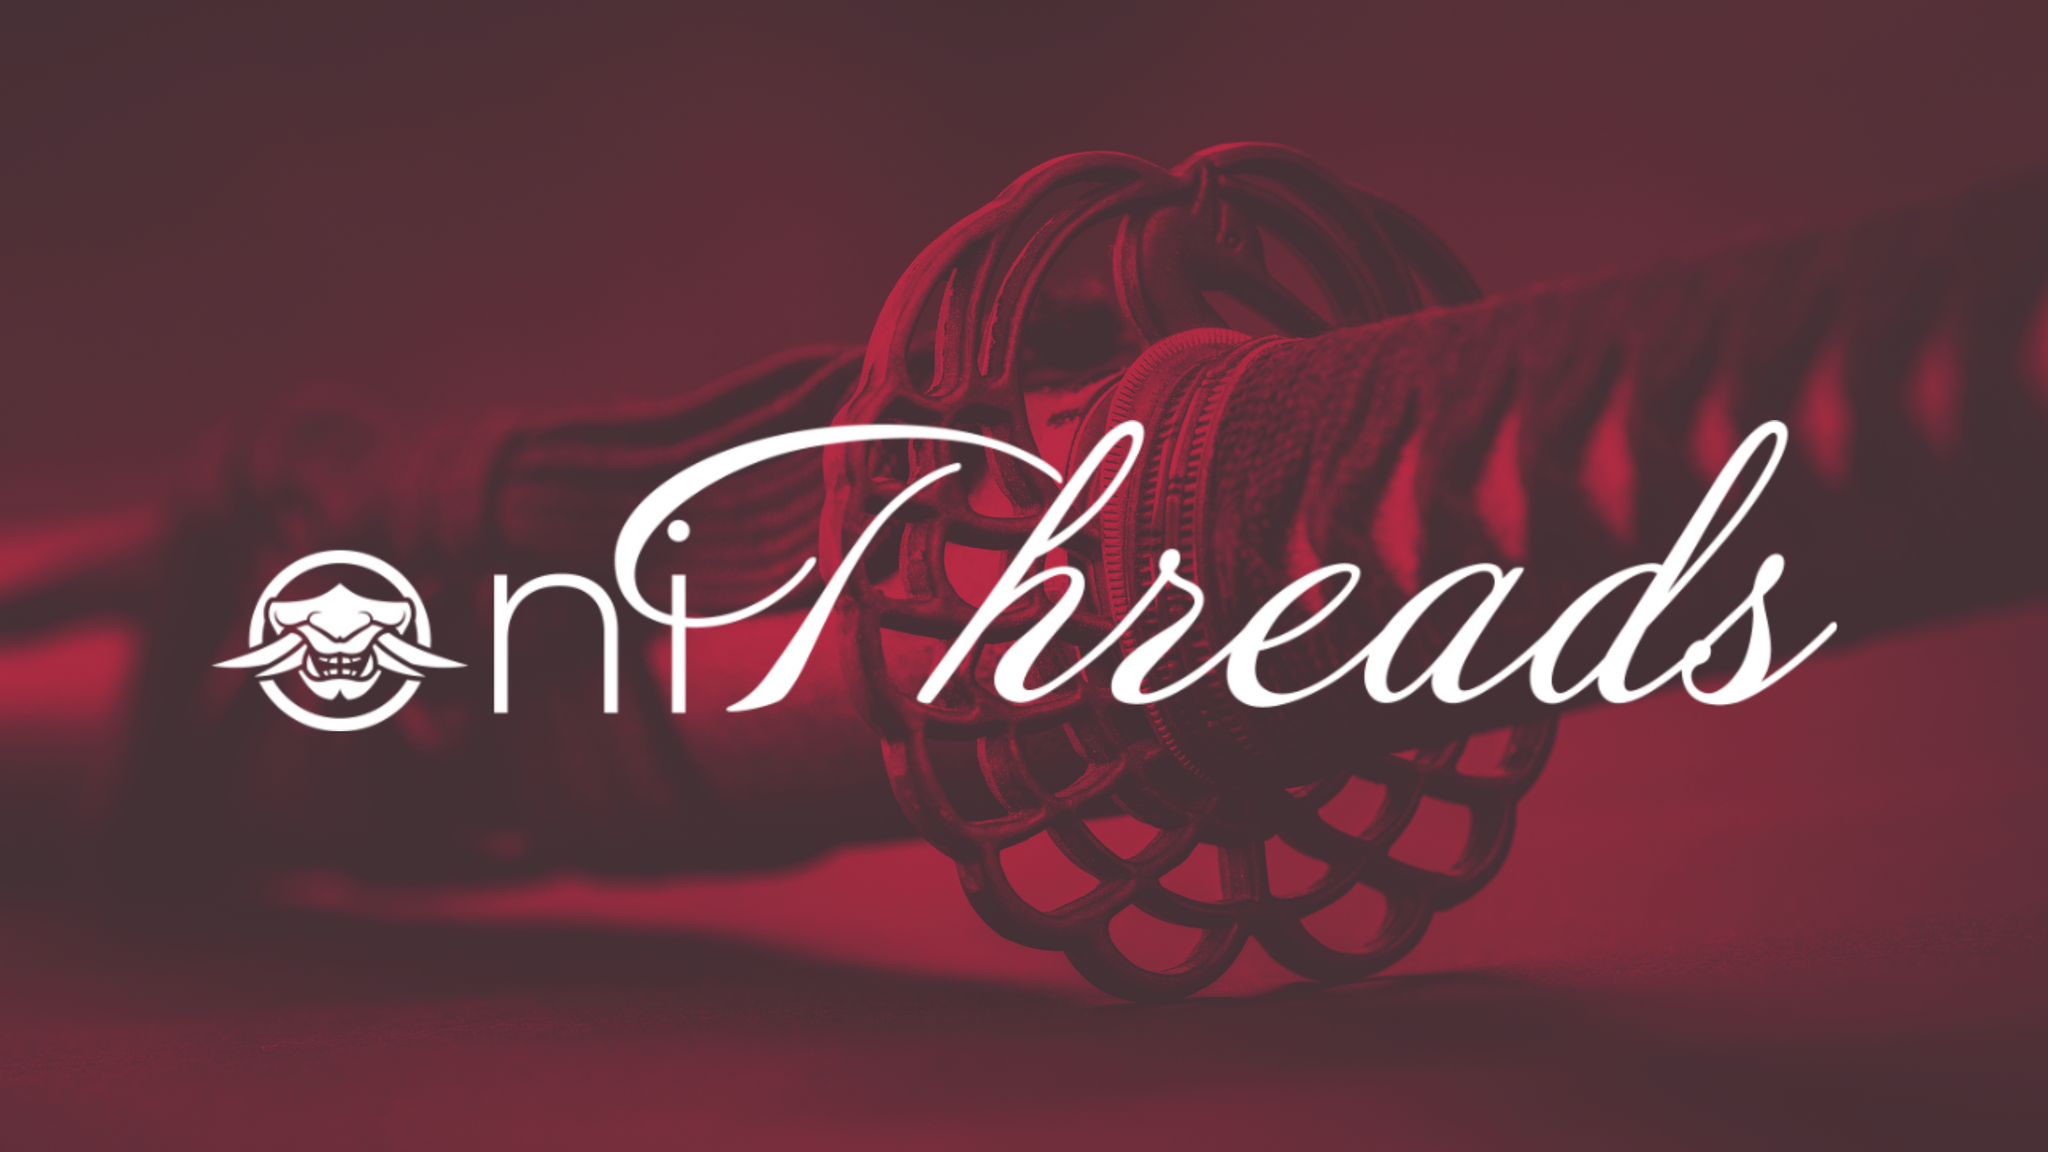 Oni Threads logo on a red overlay photo of Katana traditional Japanese sword with soft blur.